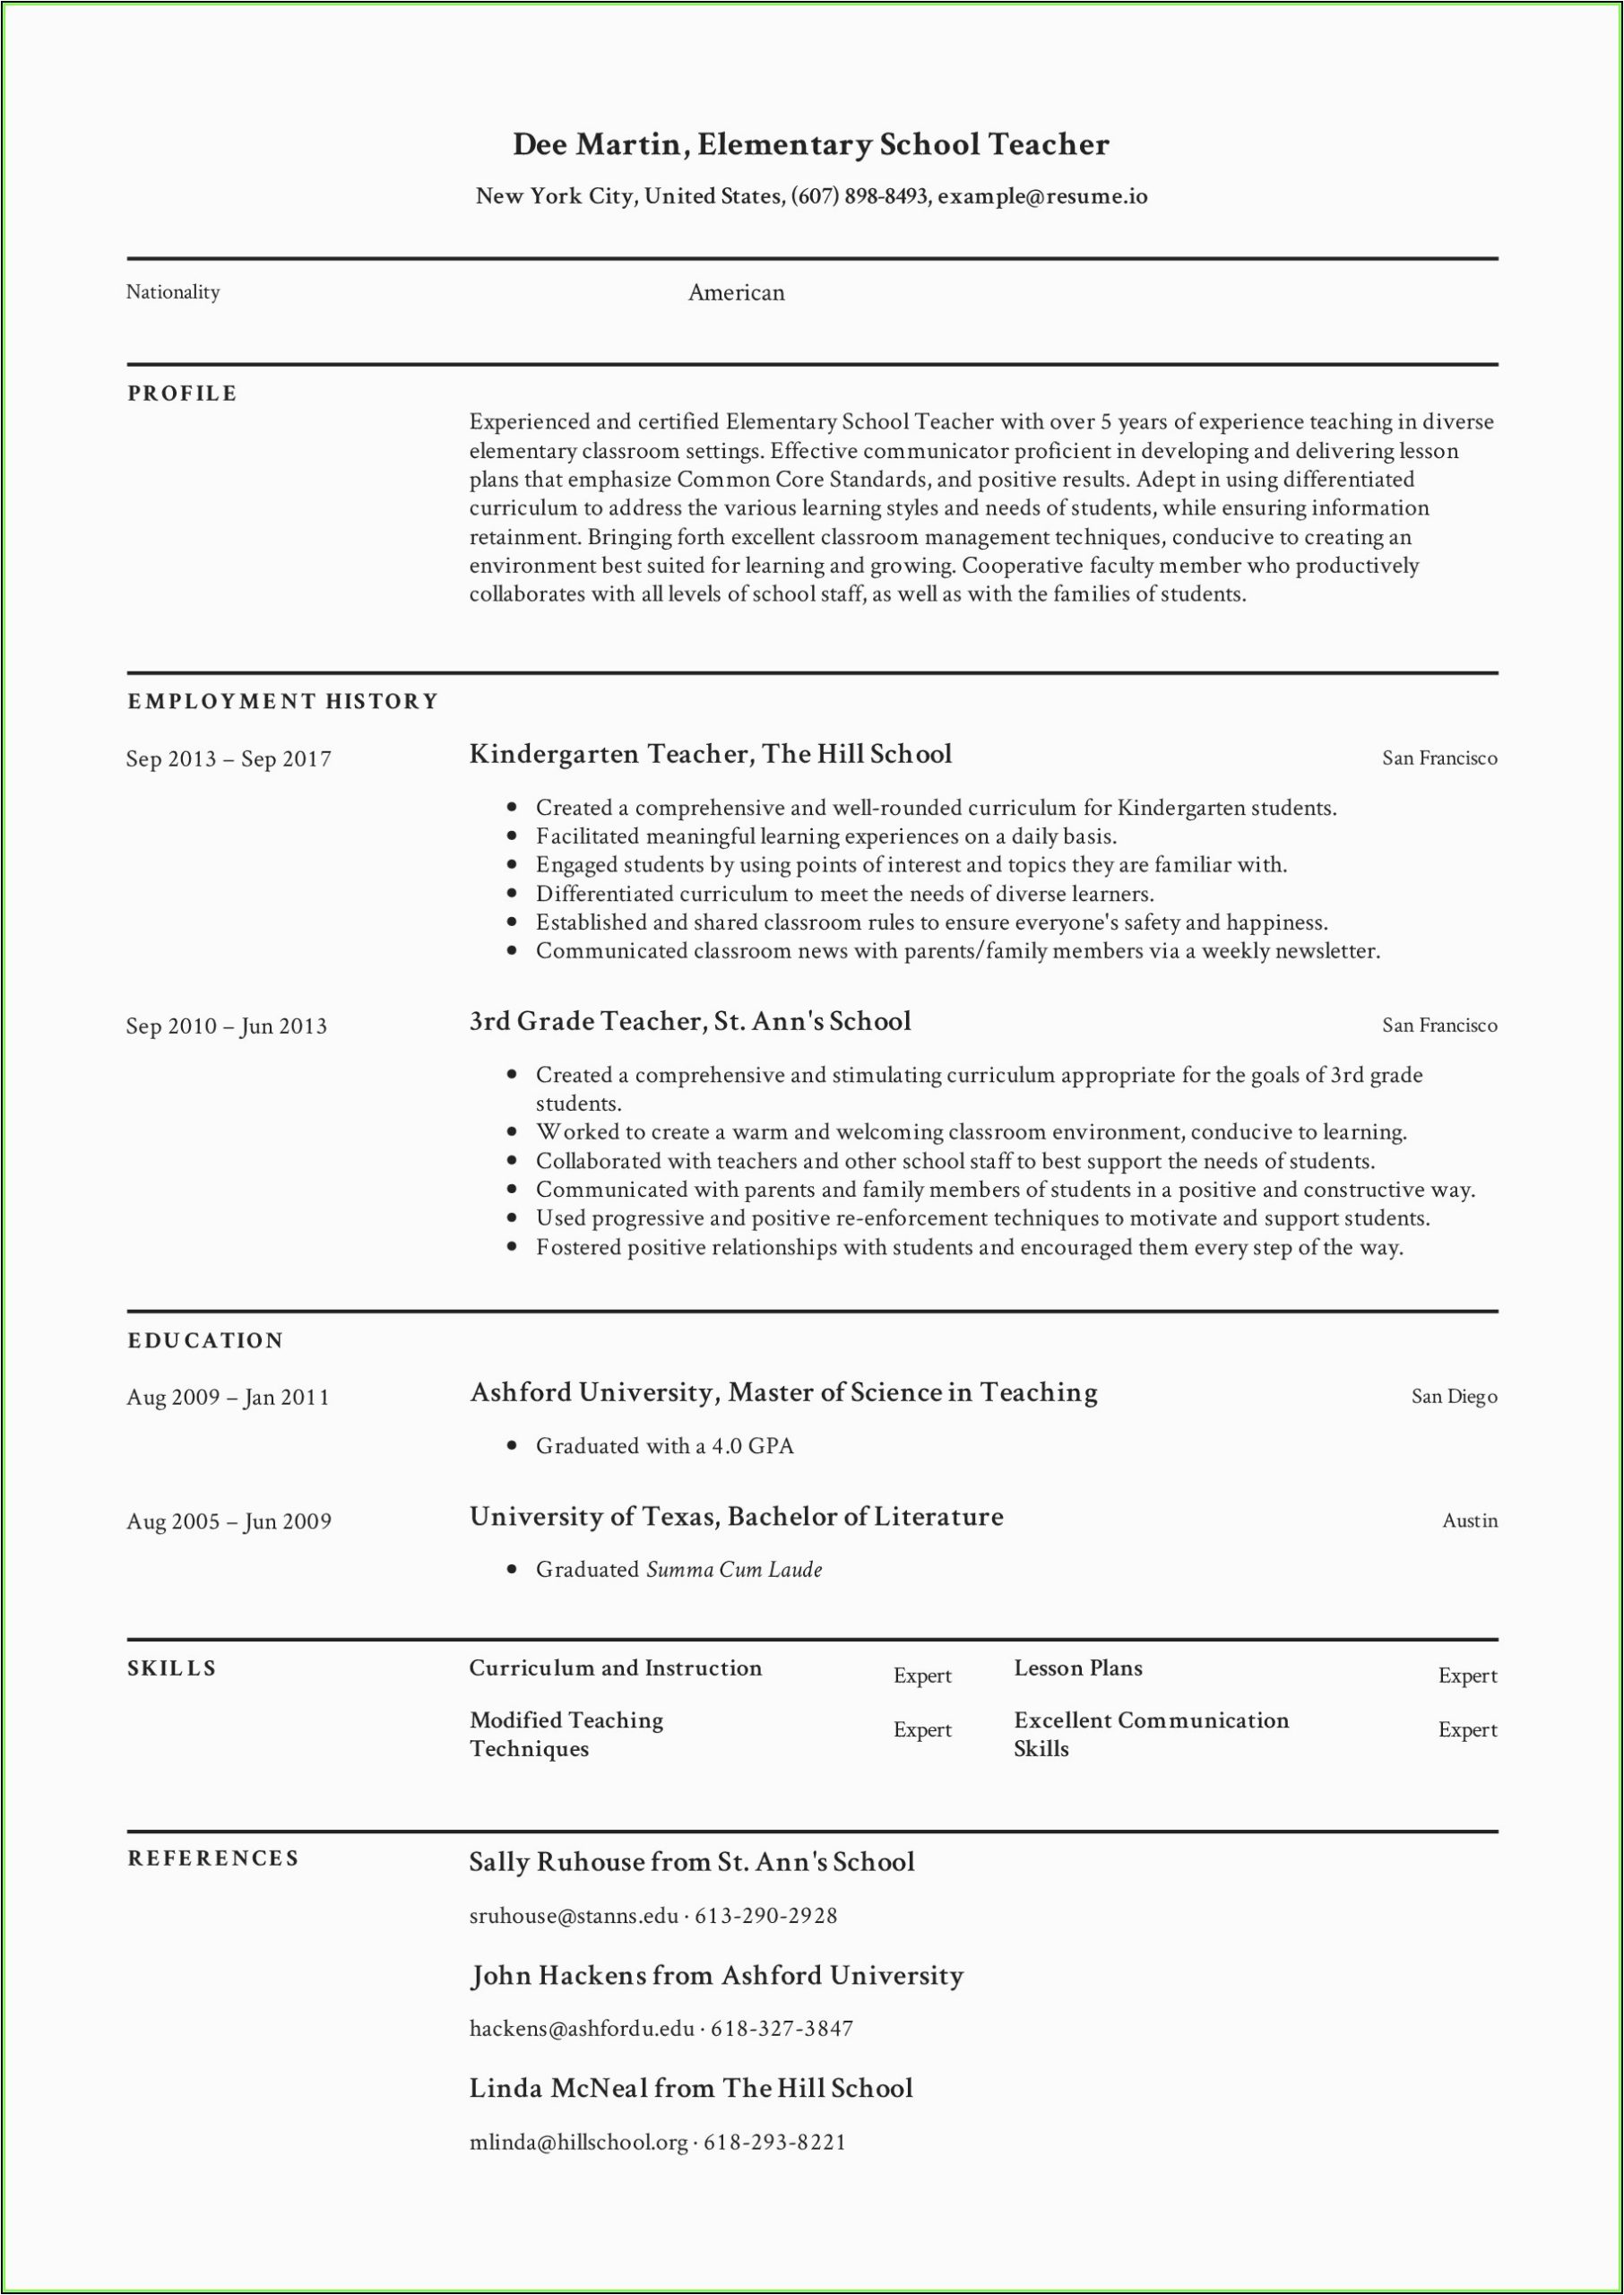 Office assistant Resume Sample In India Indian Resume format Simple Pdf Indian College Student Resume Samples